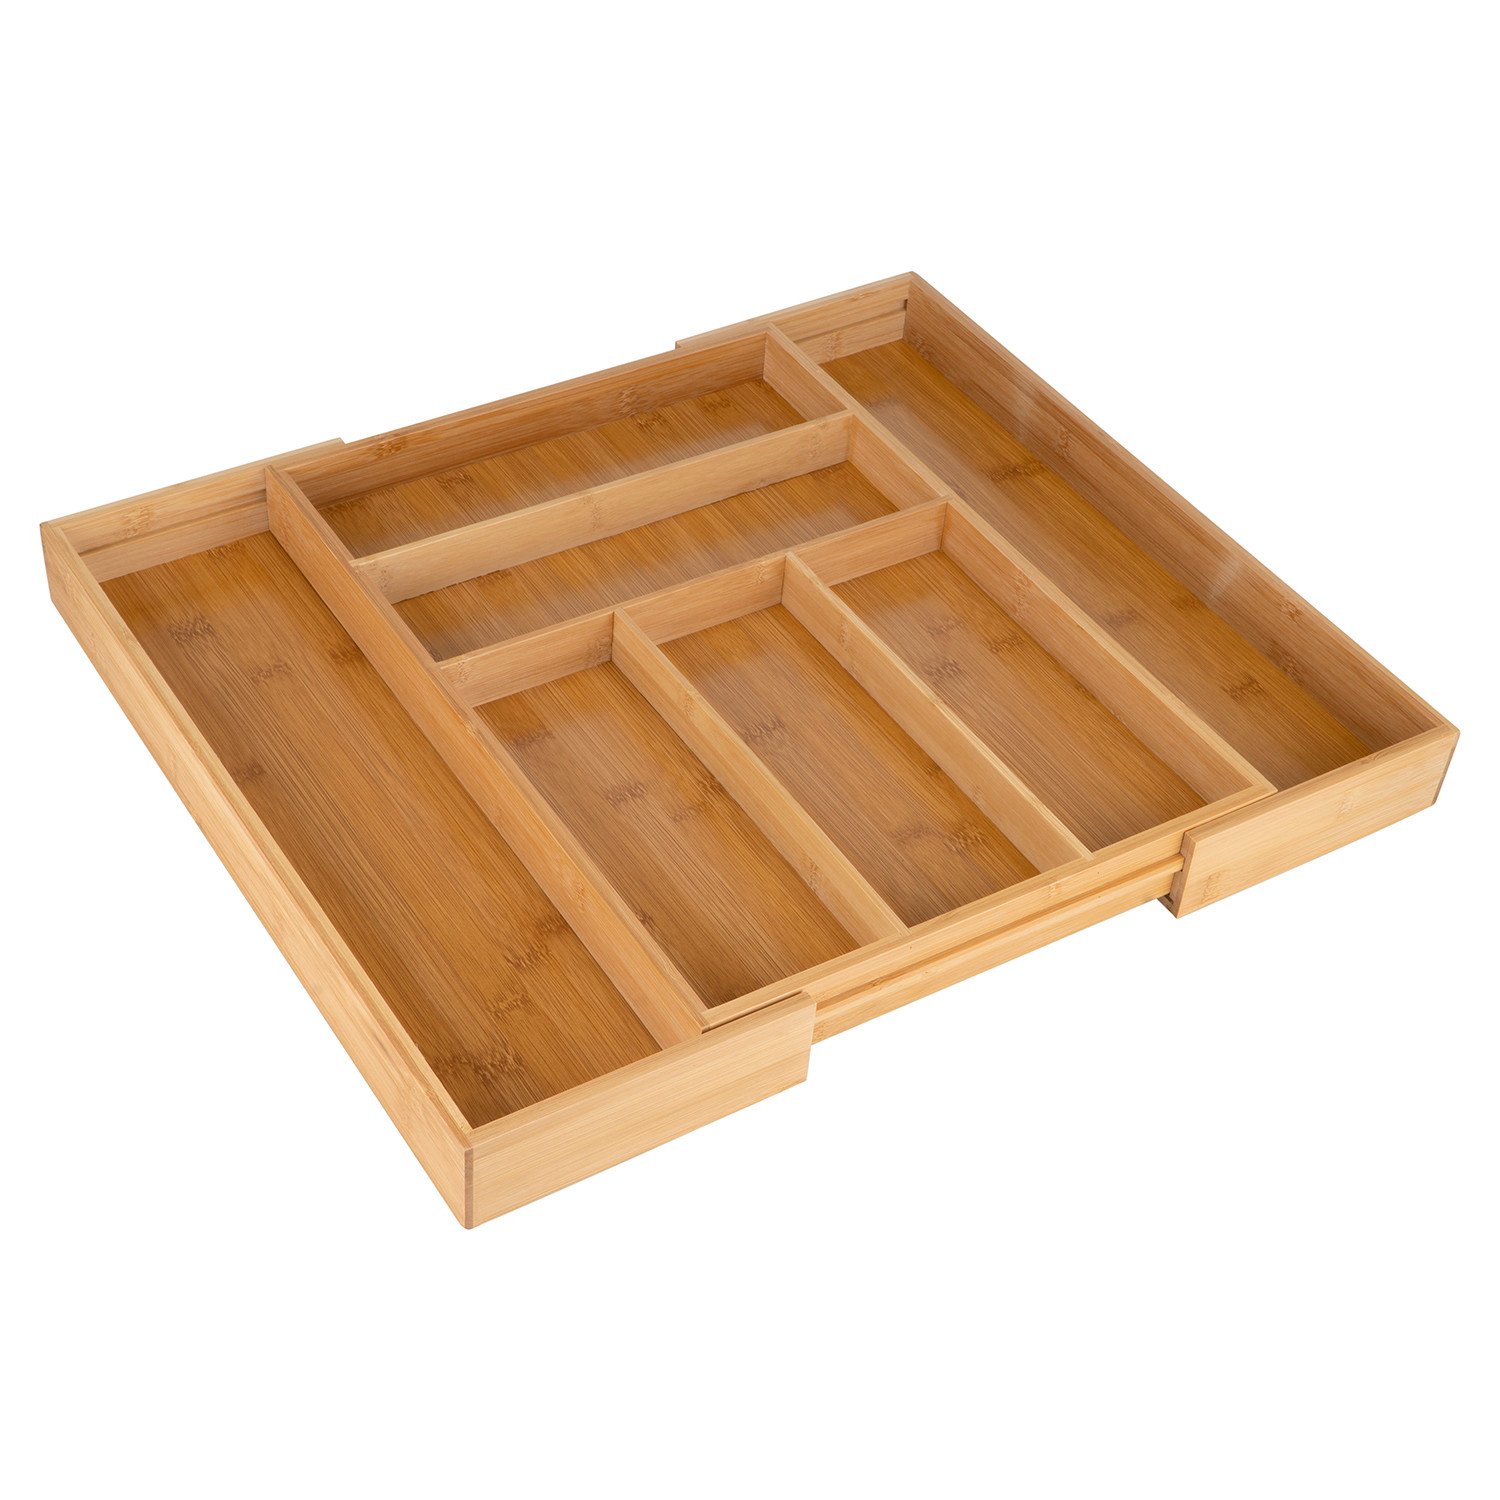 Large Extendable Bamboo Cutlery Tray Image 1